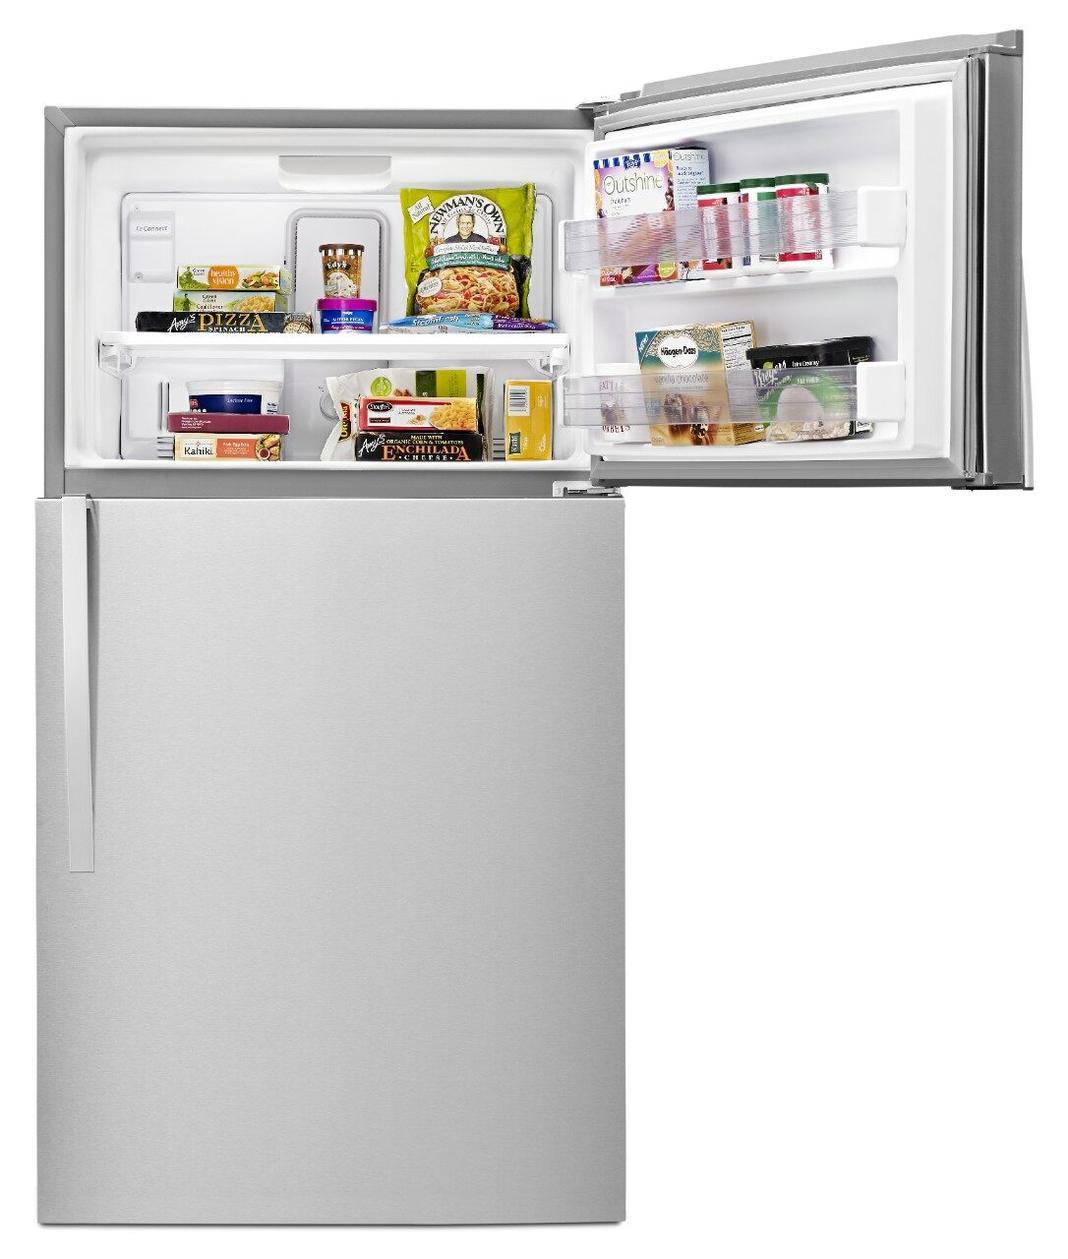 Whirlpool - 32.75 Inch 21.31 cu. ft Top Mount Refrigerator in Stainless - WRT541SZDM